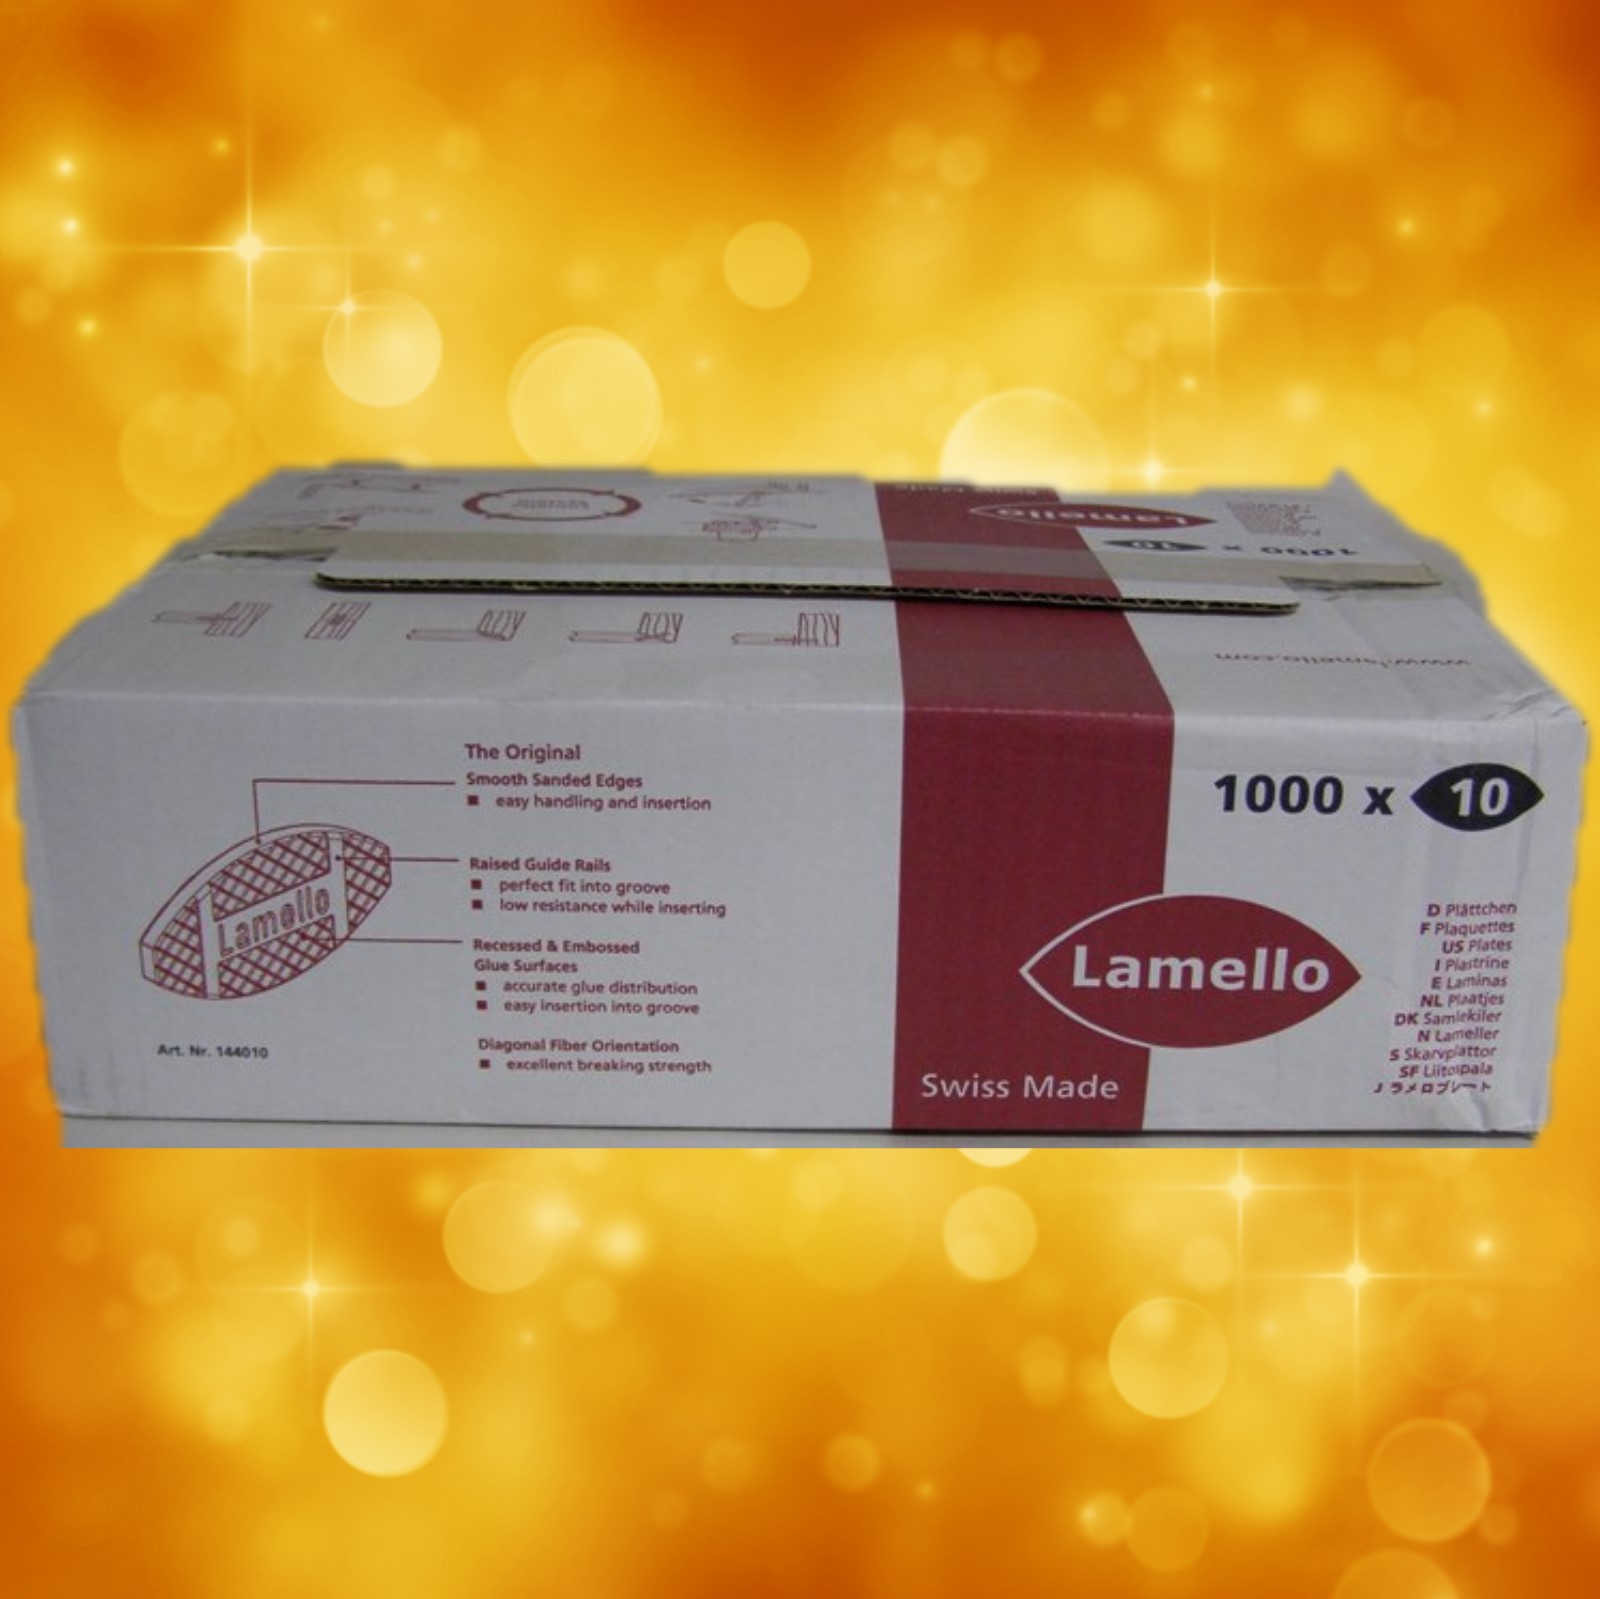 Lamello 144010 # 10 Biscuits (53 x 19 x 4 mm) Box of 1000
144010